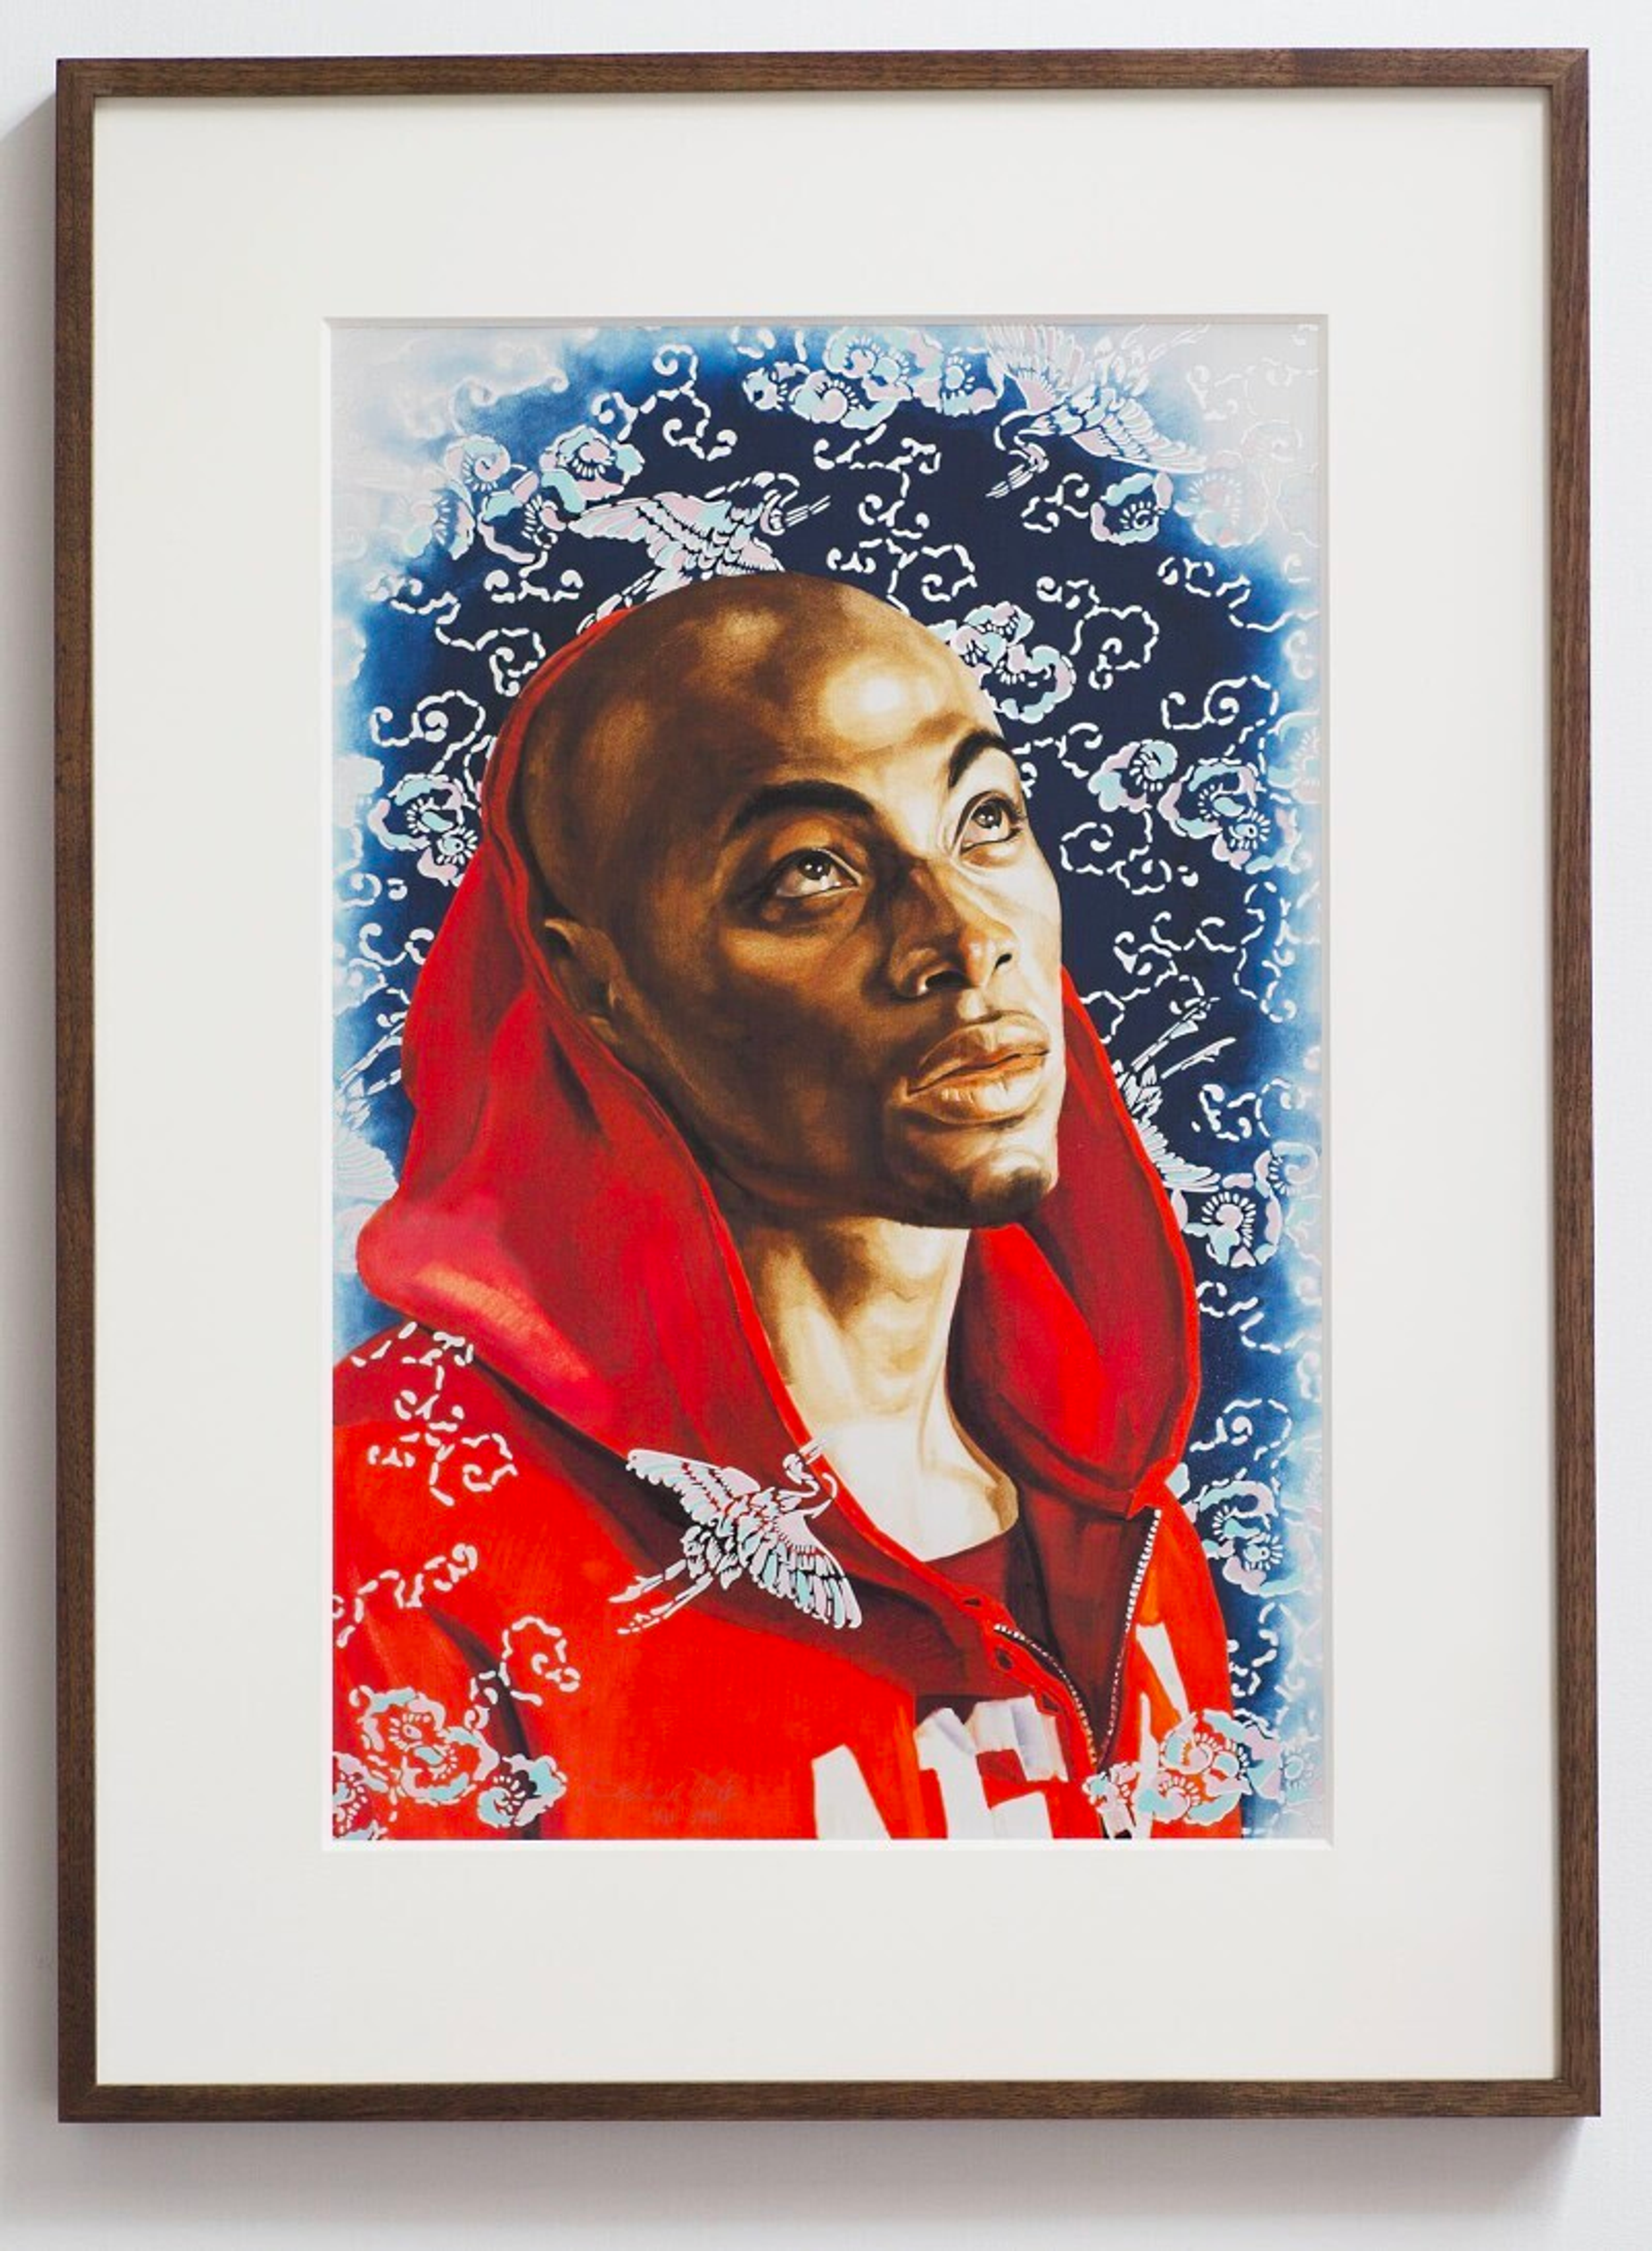 A printed portrait of a young black man in a vibrant red hooded sweatshirt, looking up with his side profile. Blue foliage backdrop adds depth.